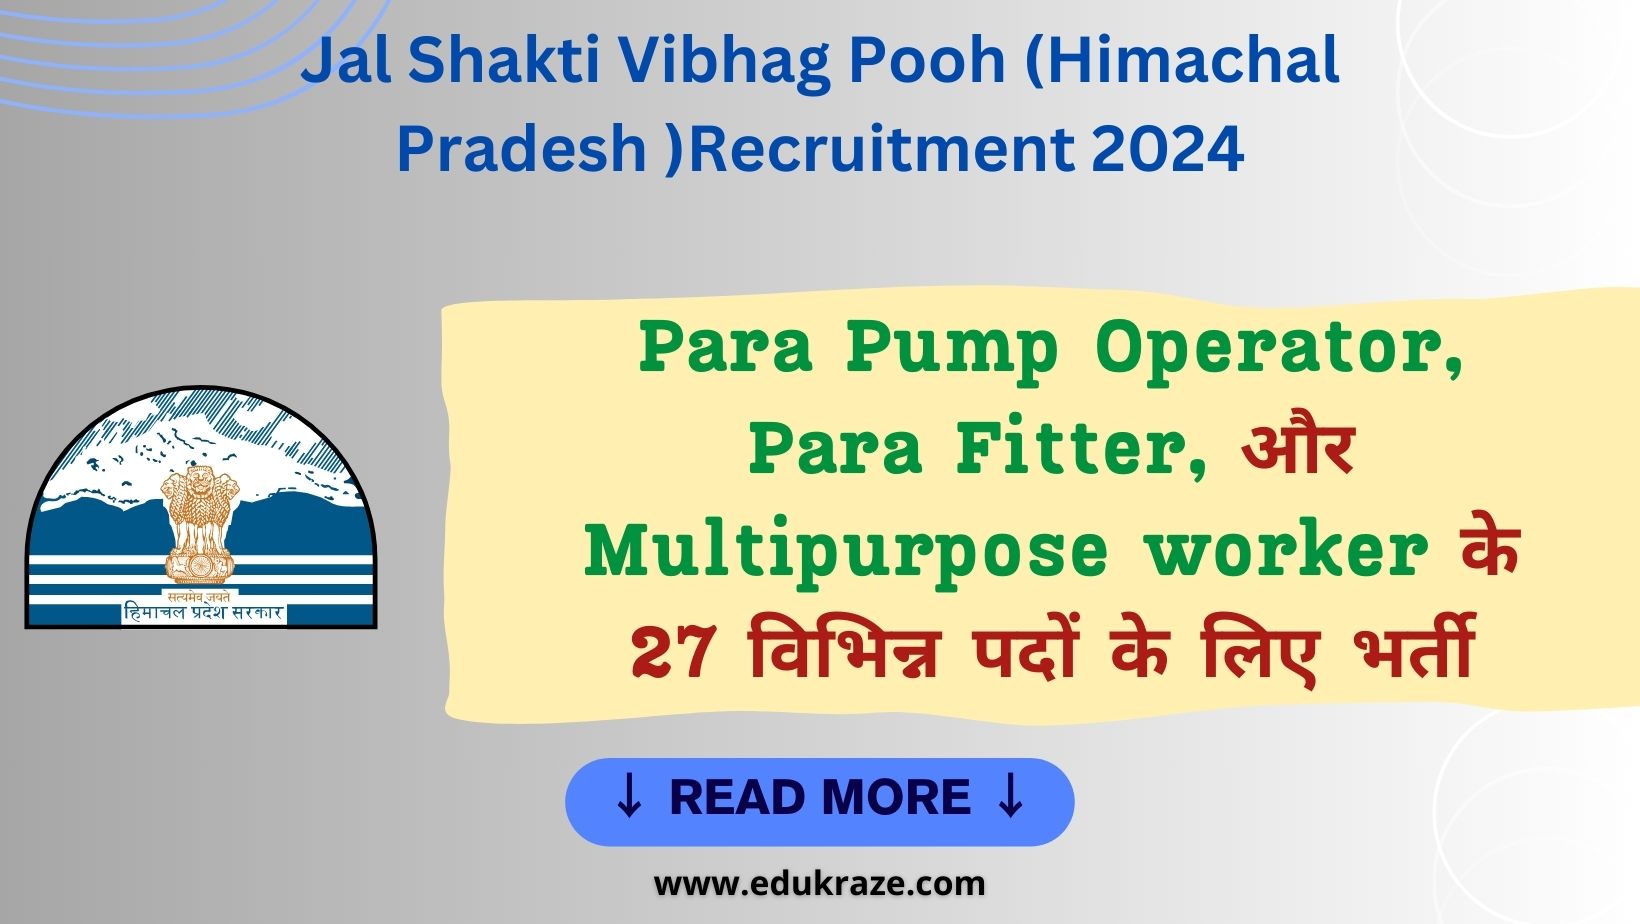 You are currently viewing Para Pump Operator, Para Fitter & Multipurpose Worker Recruitment Out at HP Jal Shakti Vibhag Division Pooh